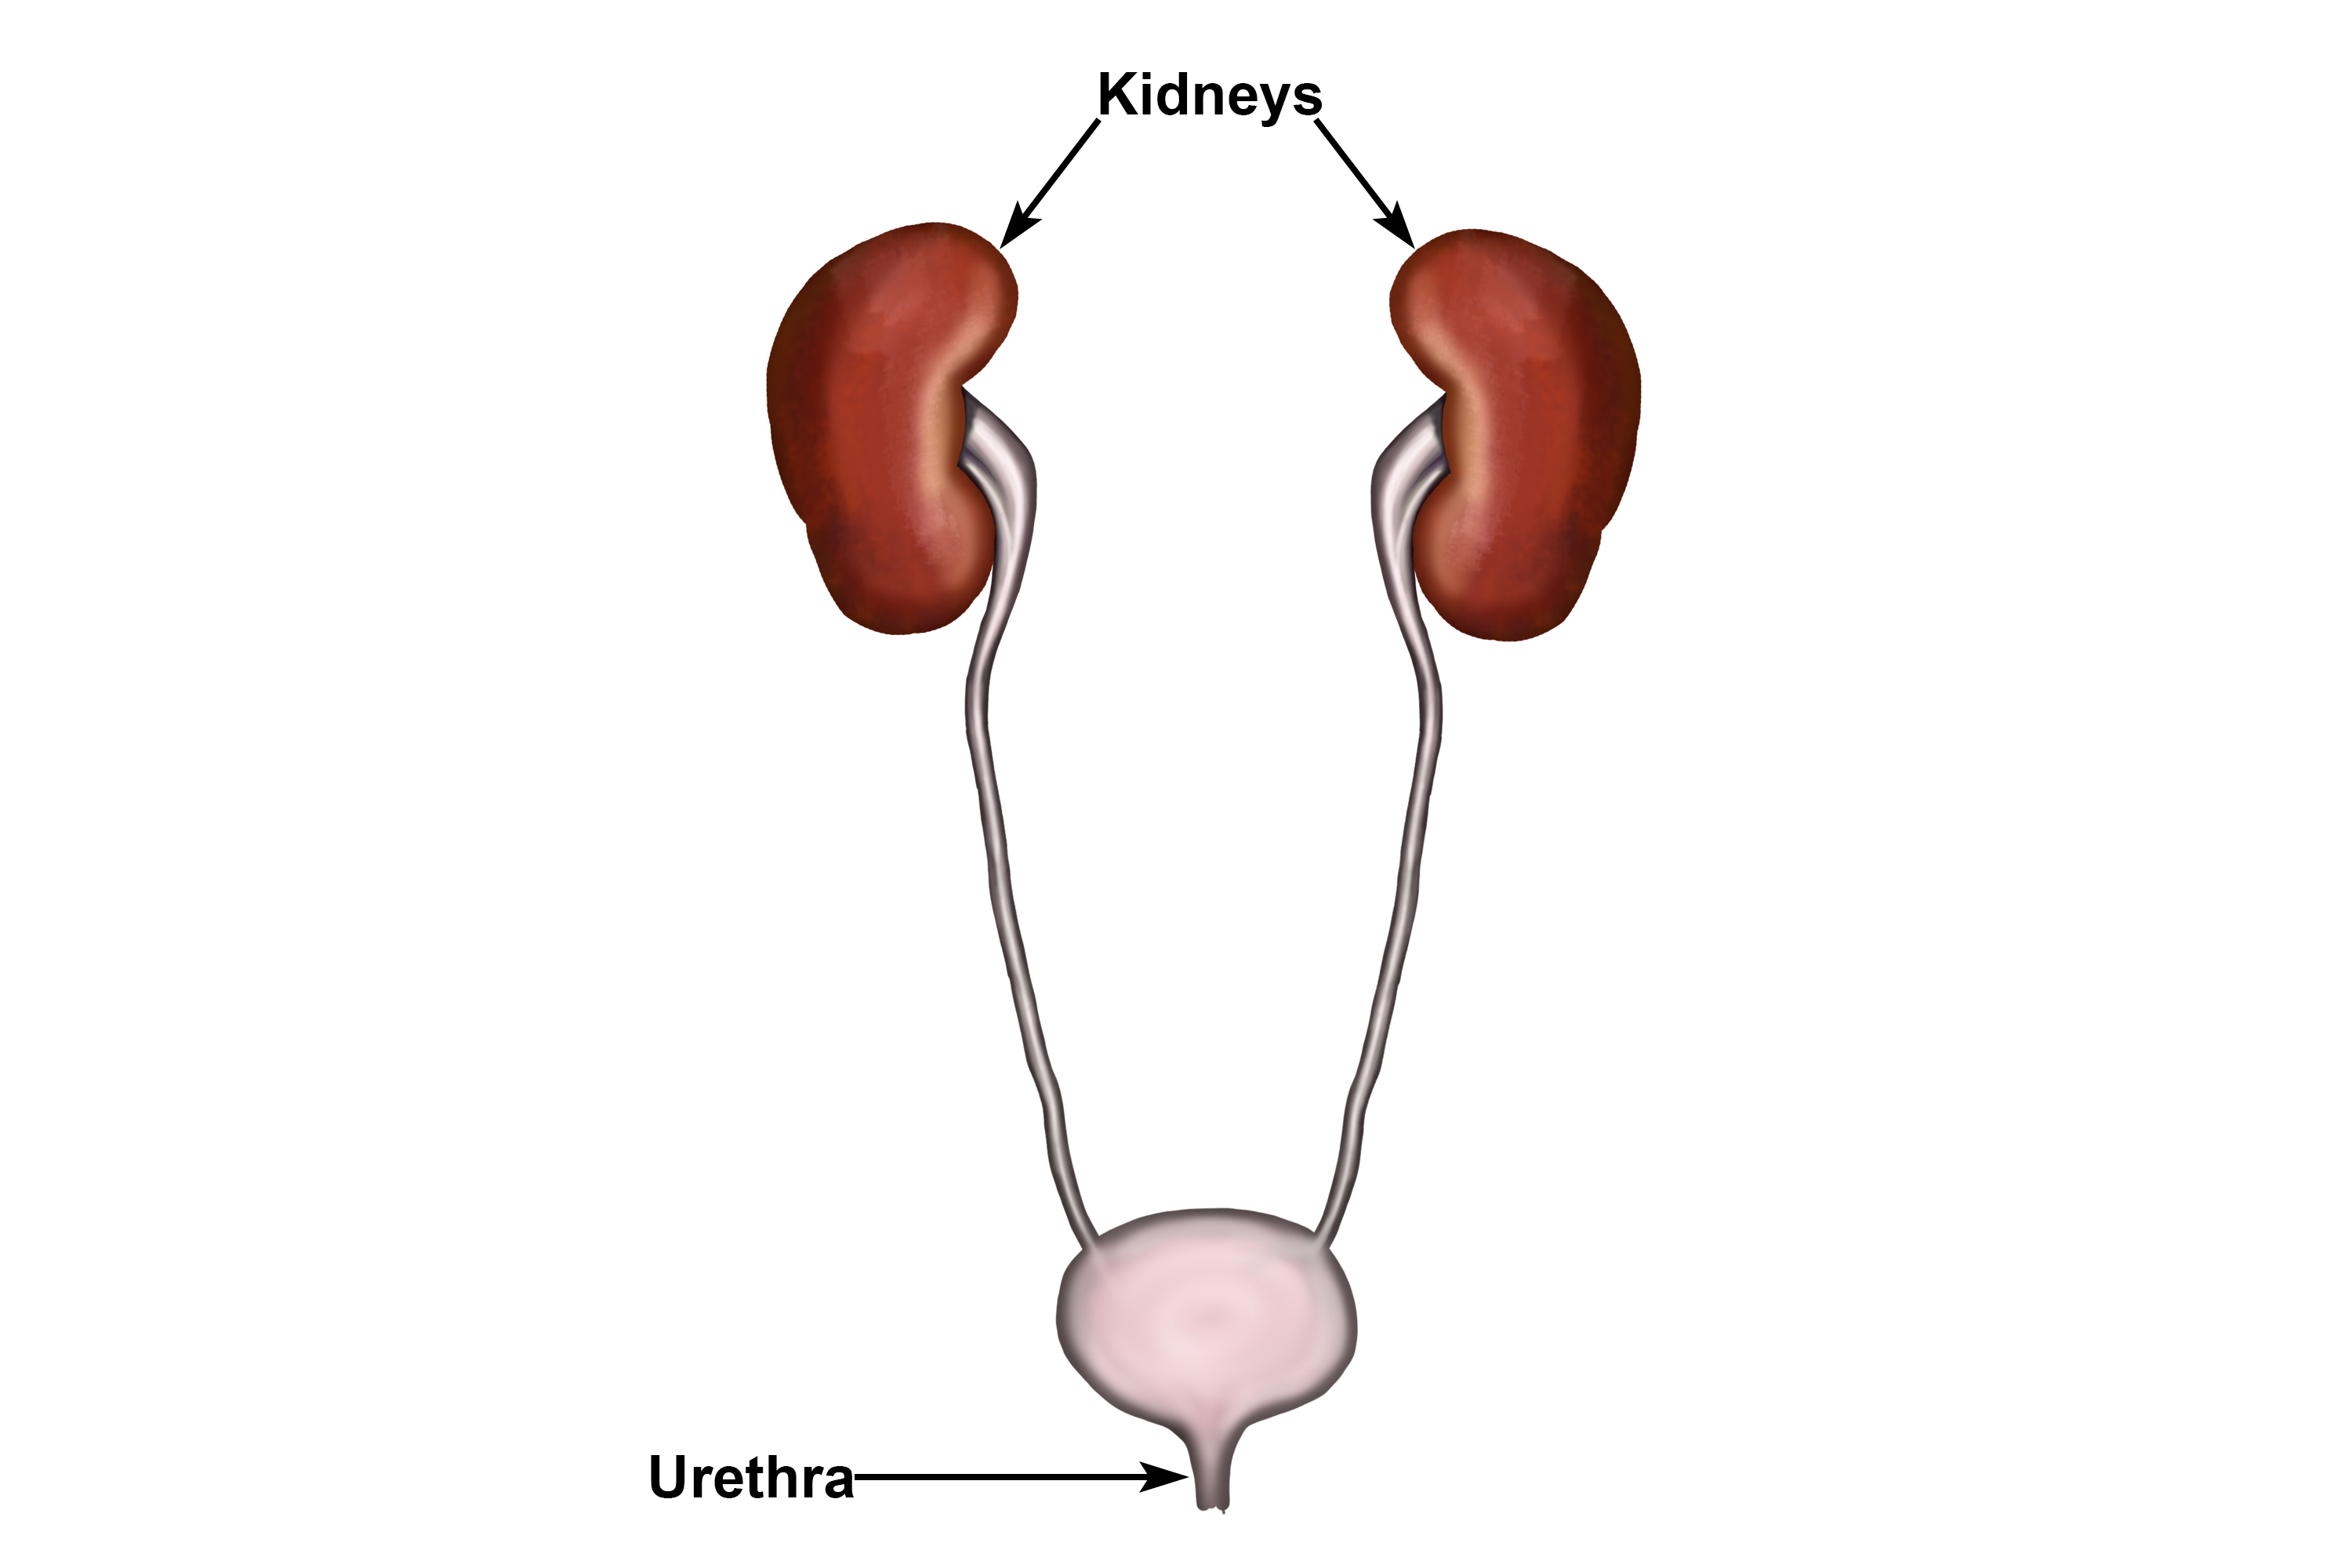 During urination the liquid from the bladder rushes down the urethra and out of the body